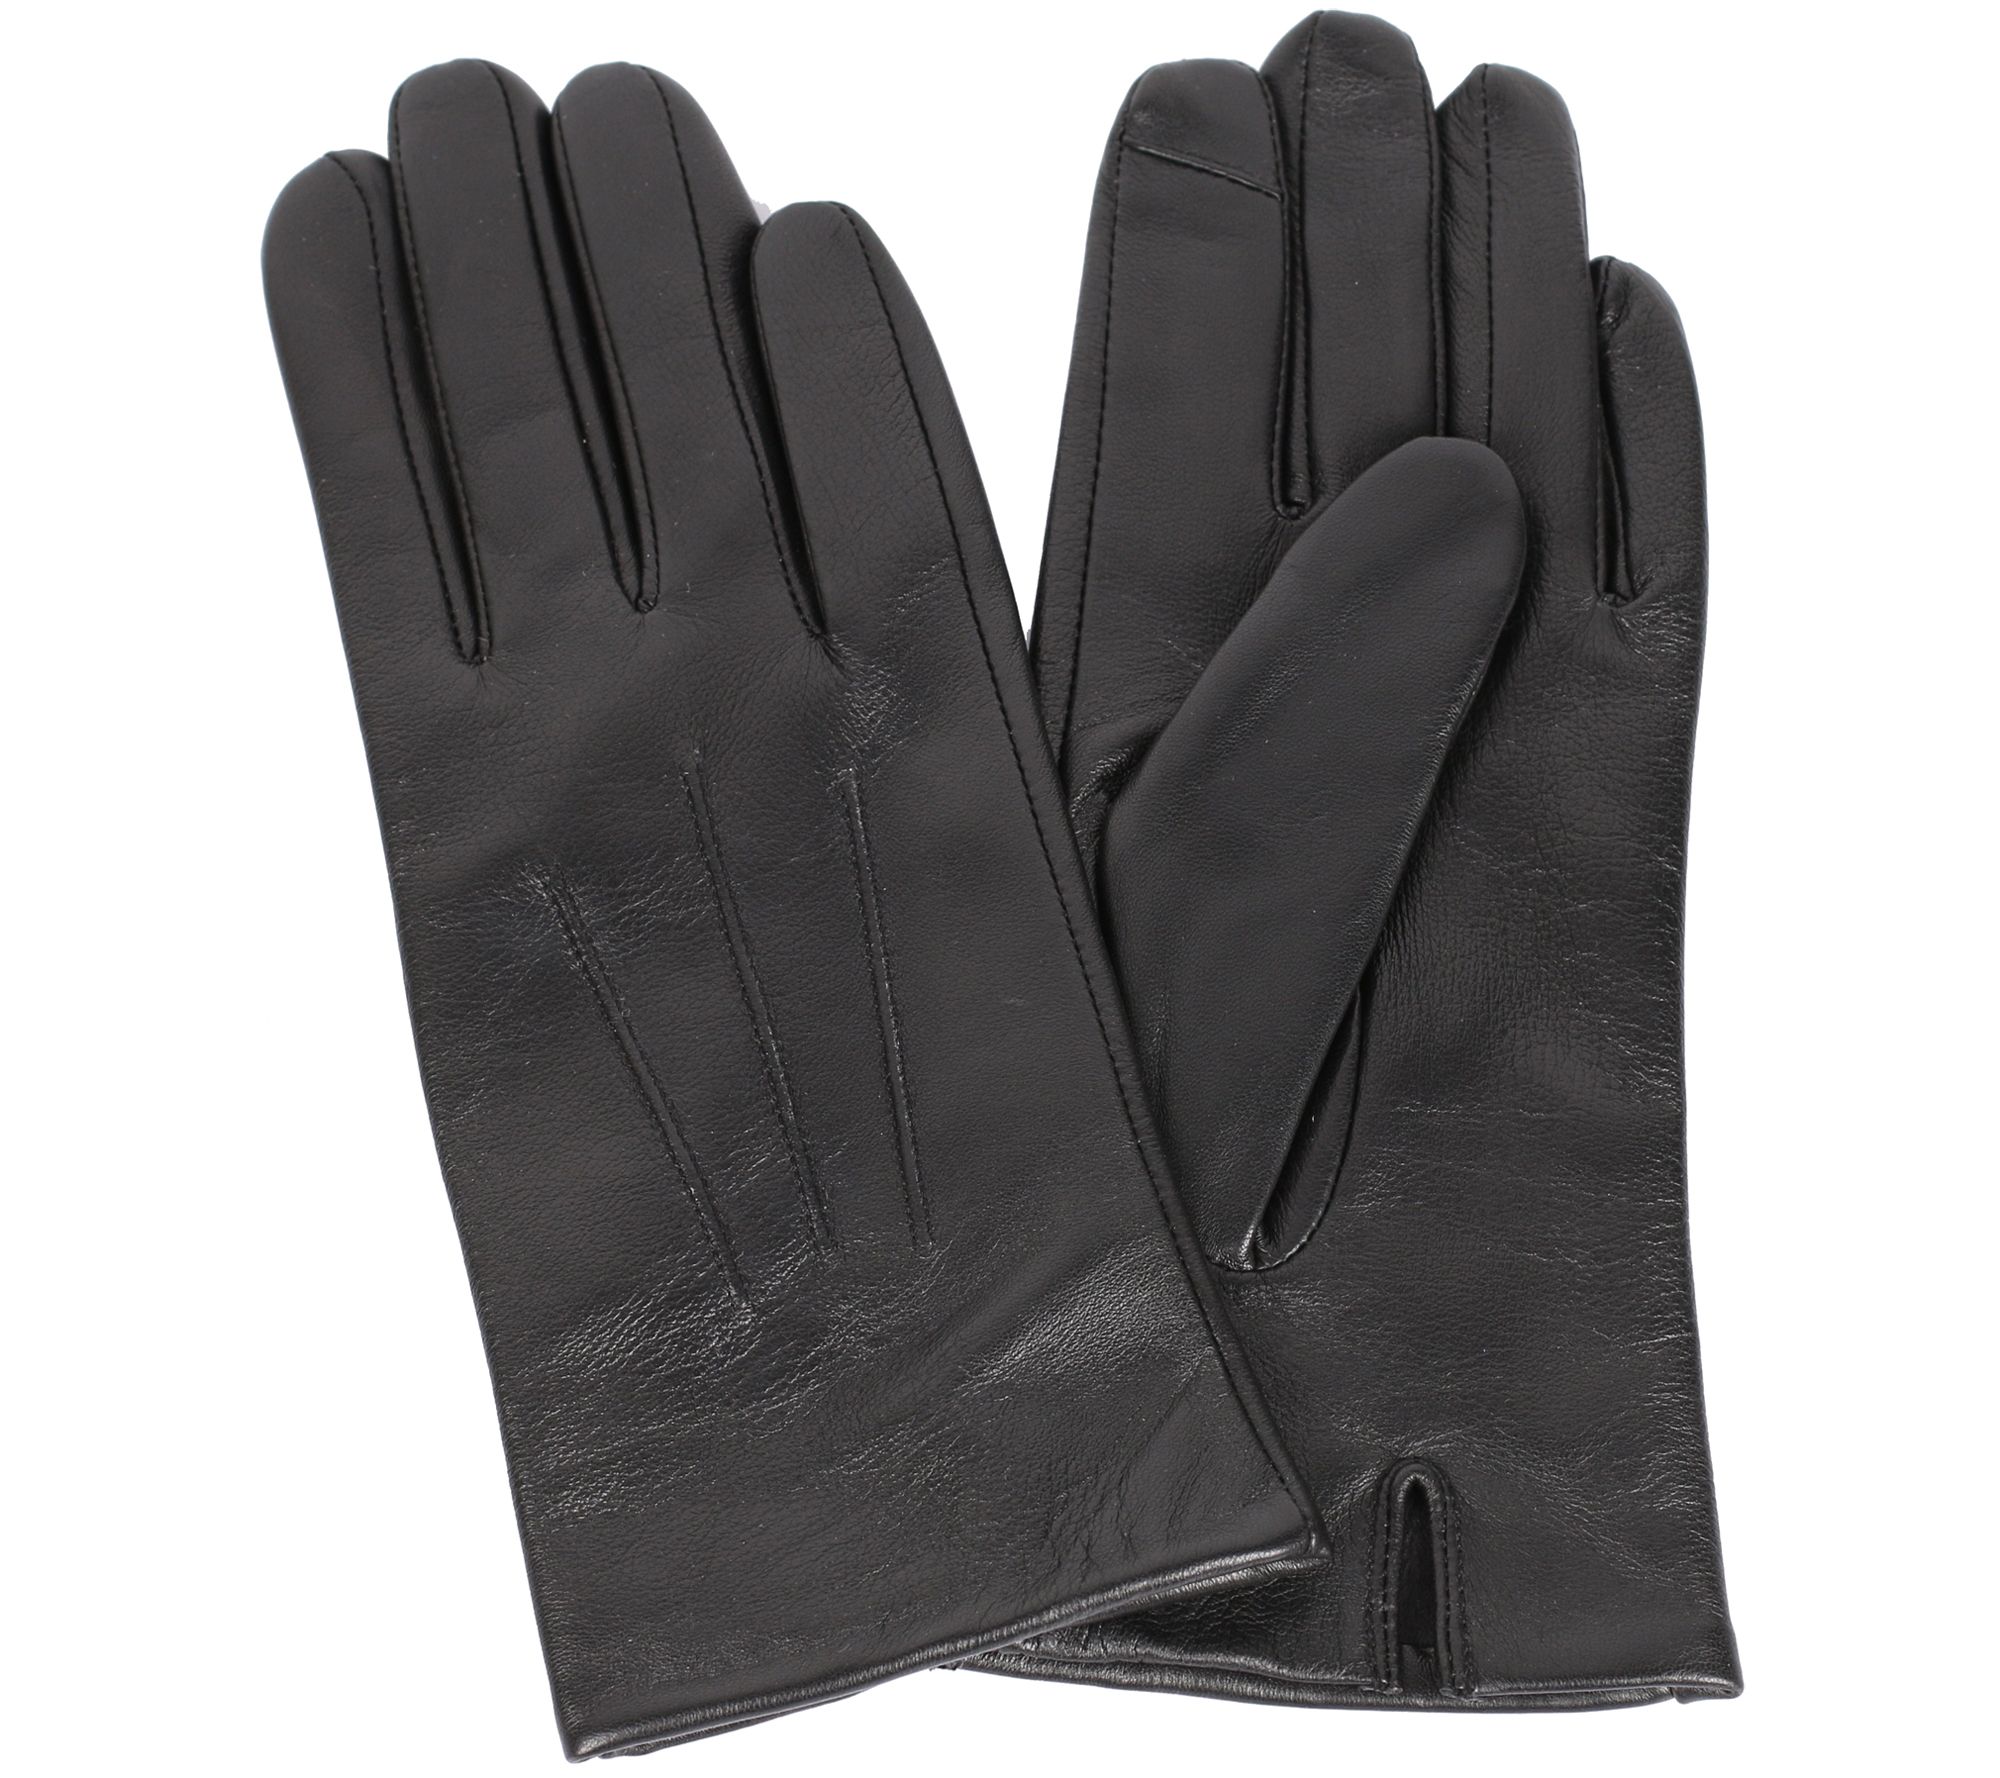 Karla Hanson Women's Leather Touch Screen Gloves - QVC.com